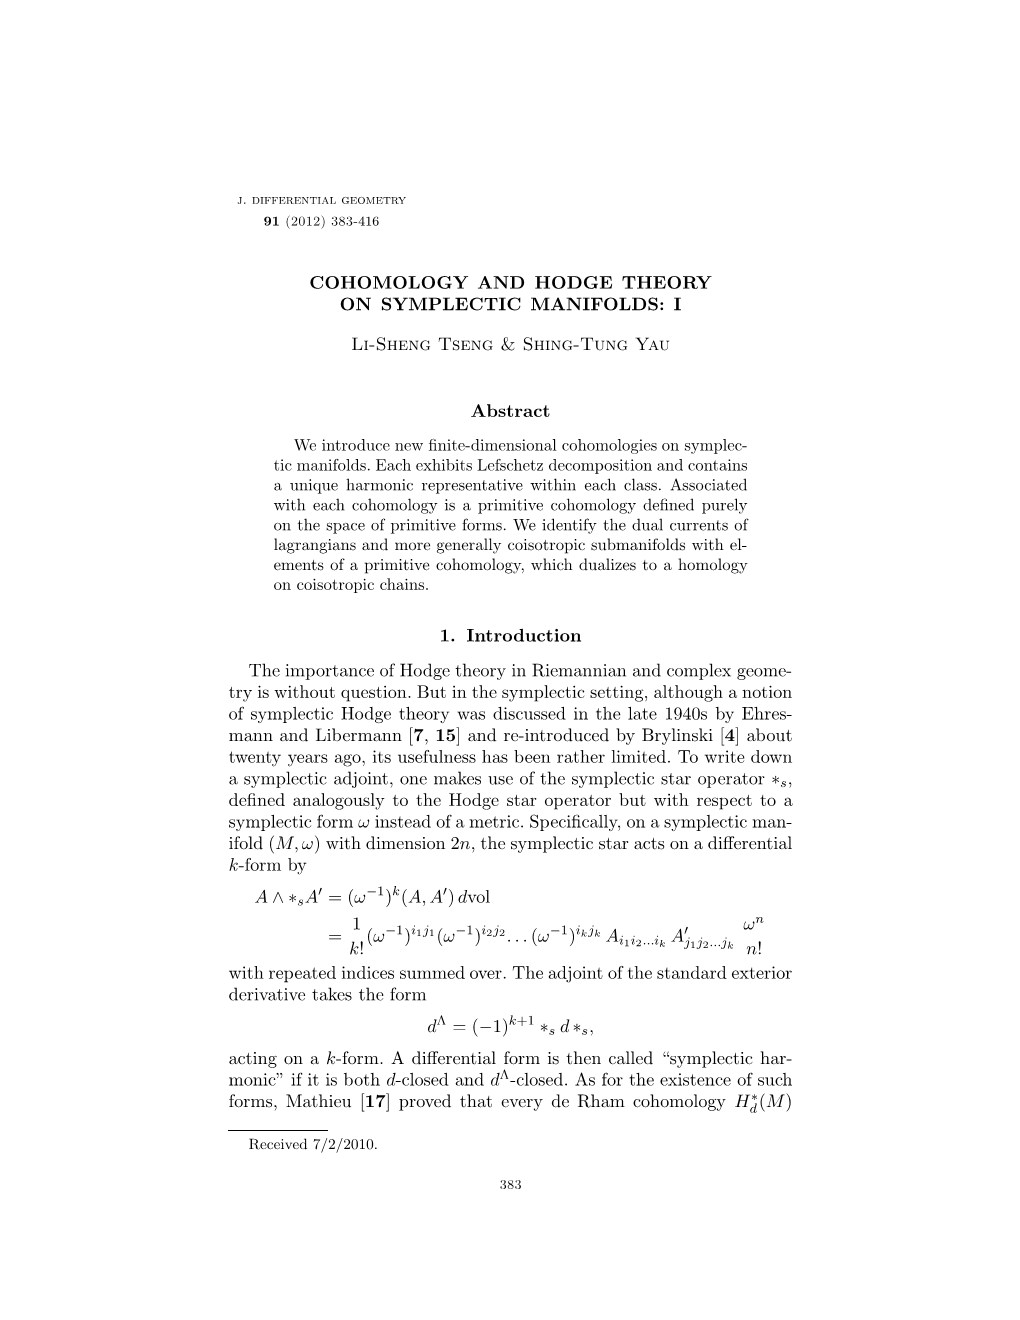 Cohomology and Hodge Theory on Symplectic Manifolds: I